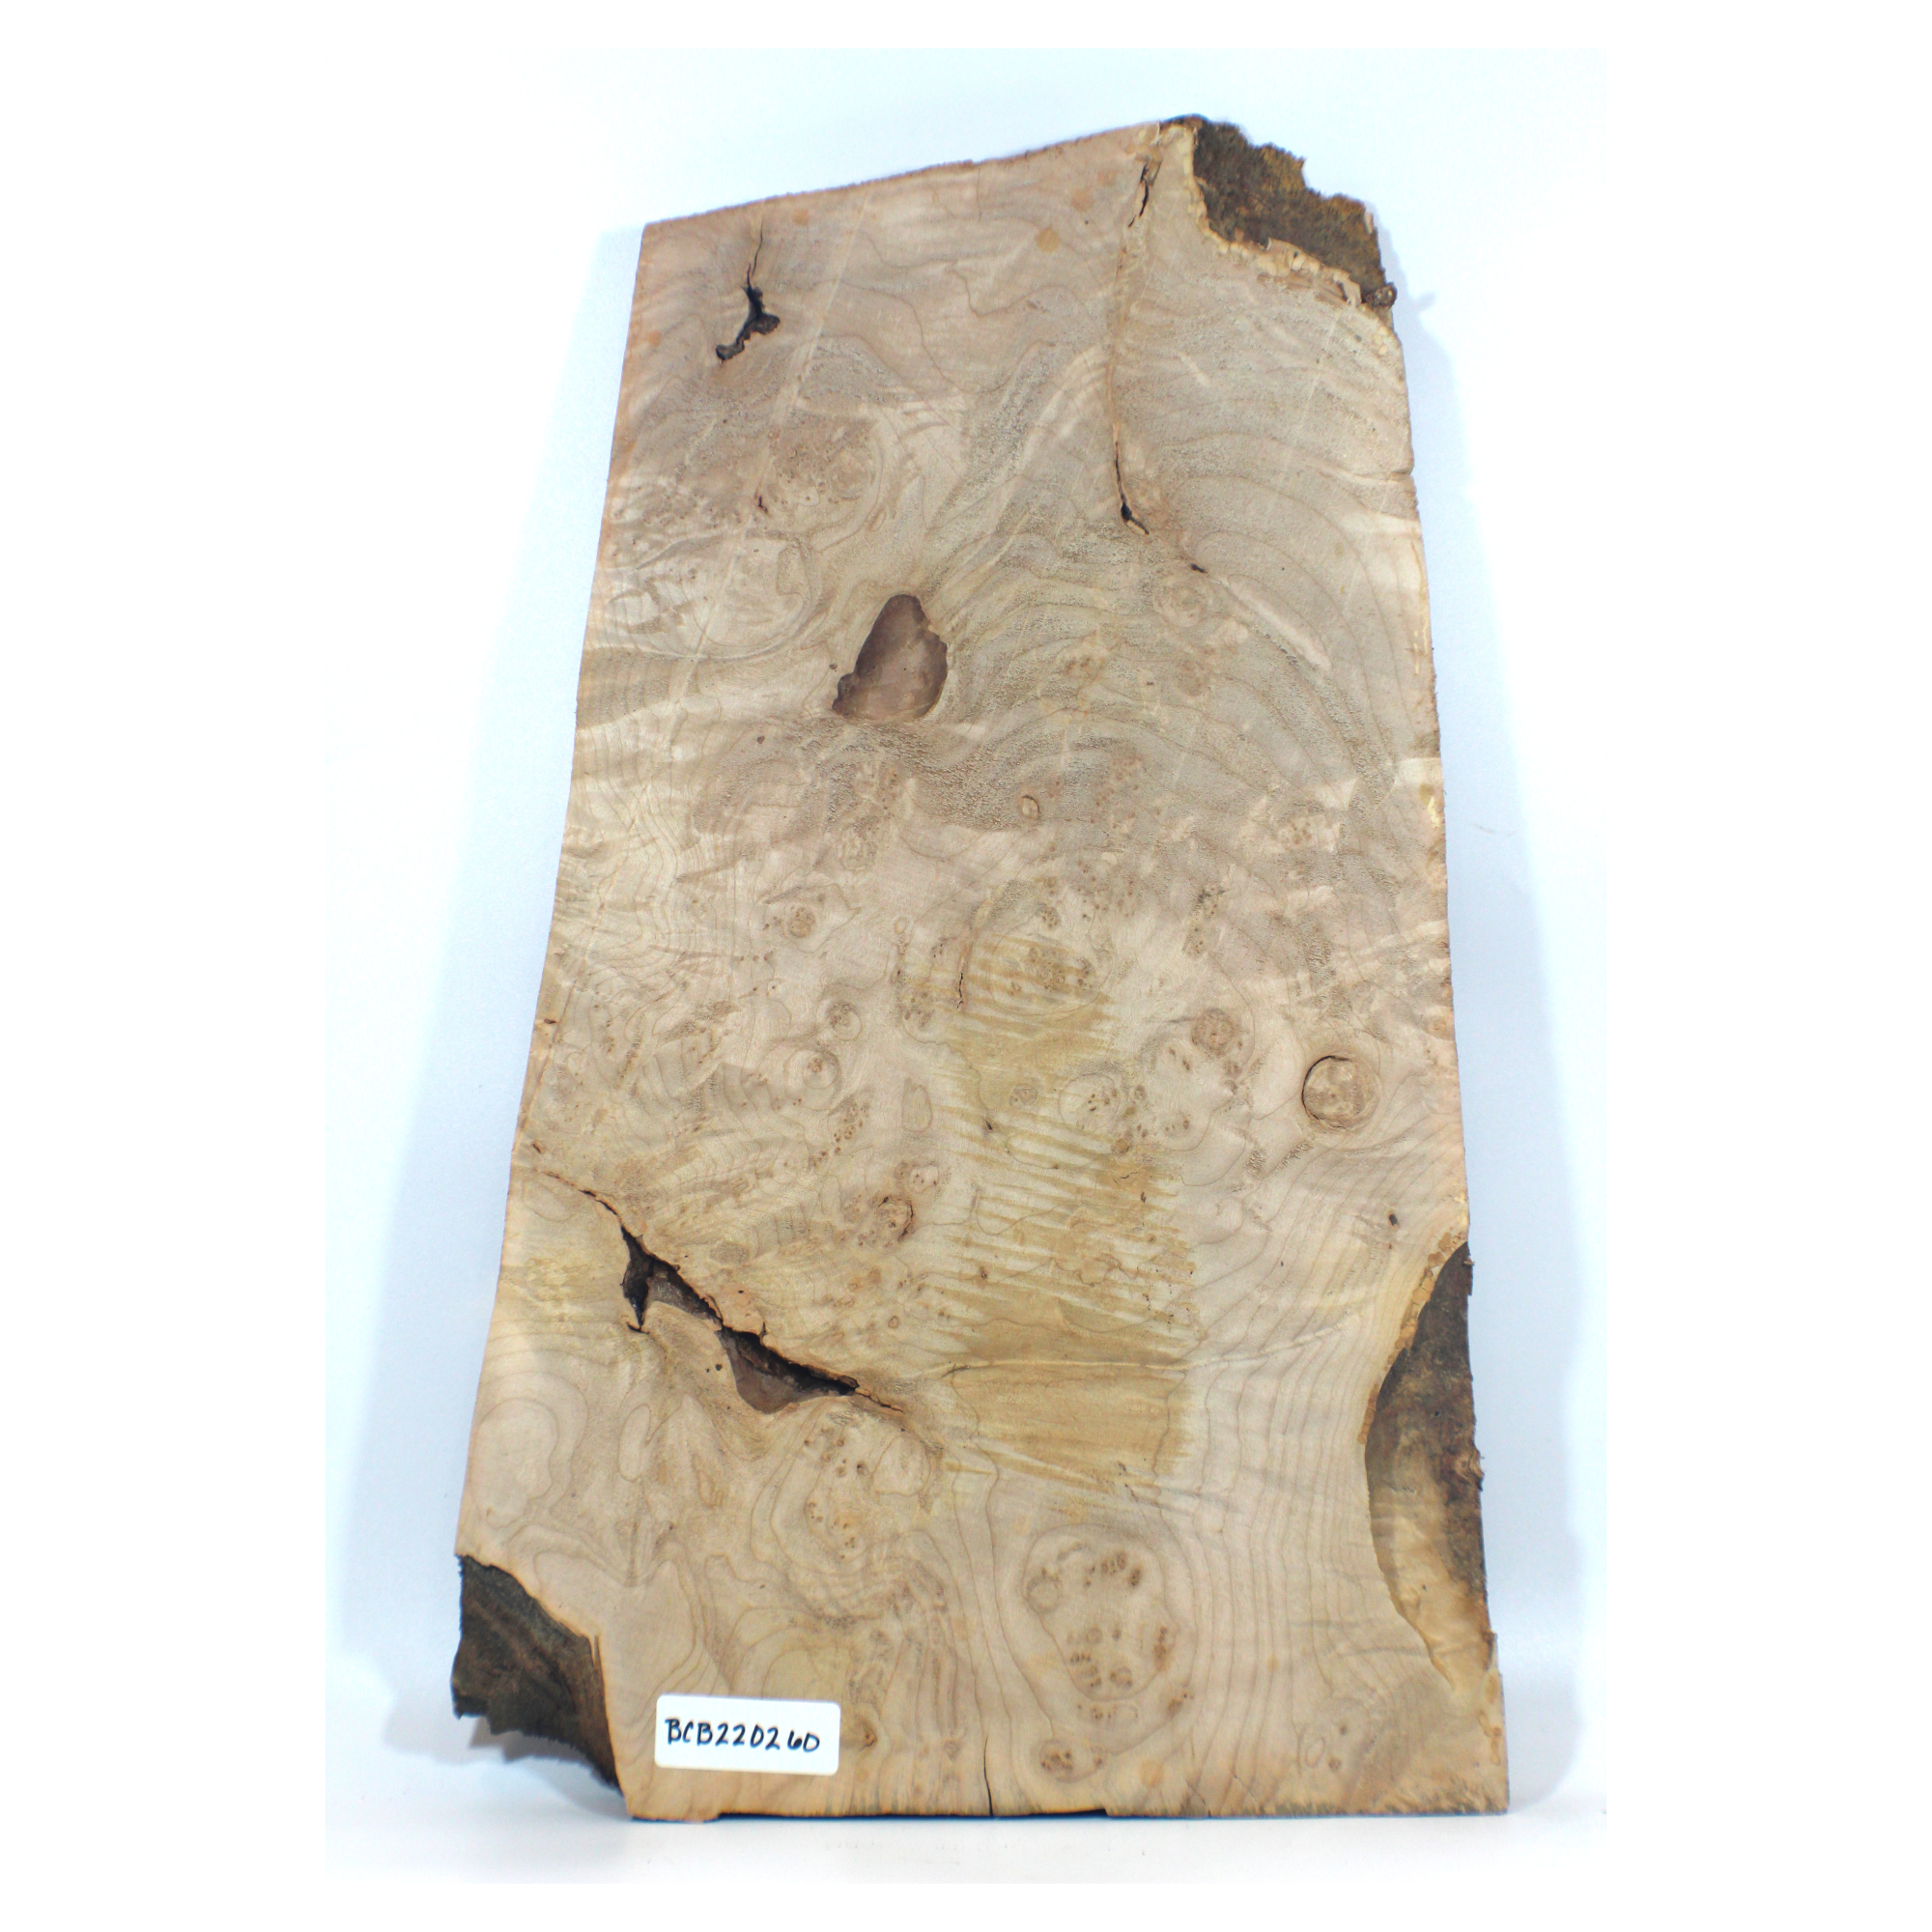 Maple burl craft board with heavy eye spots, curl, and interesting bark seam voids.  Dimensions: Thickness: 1.25